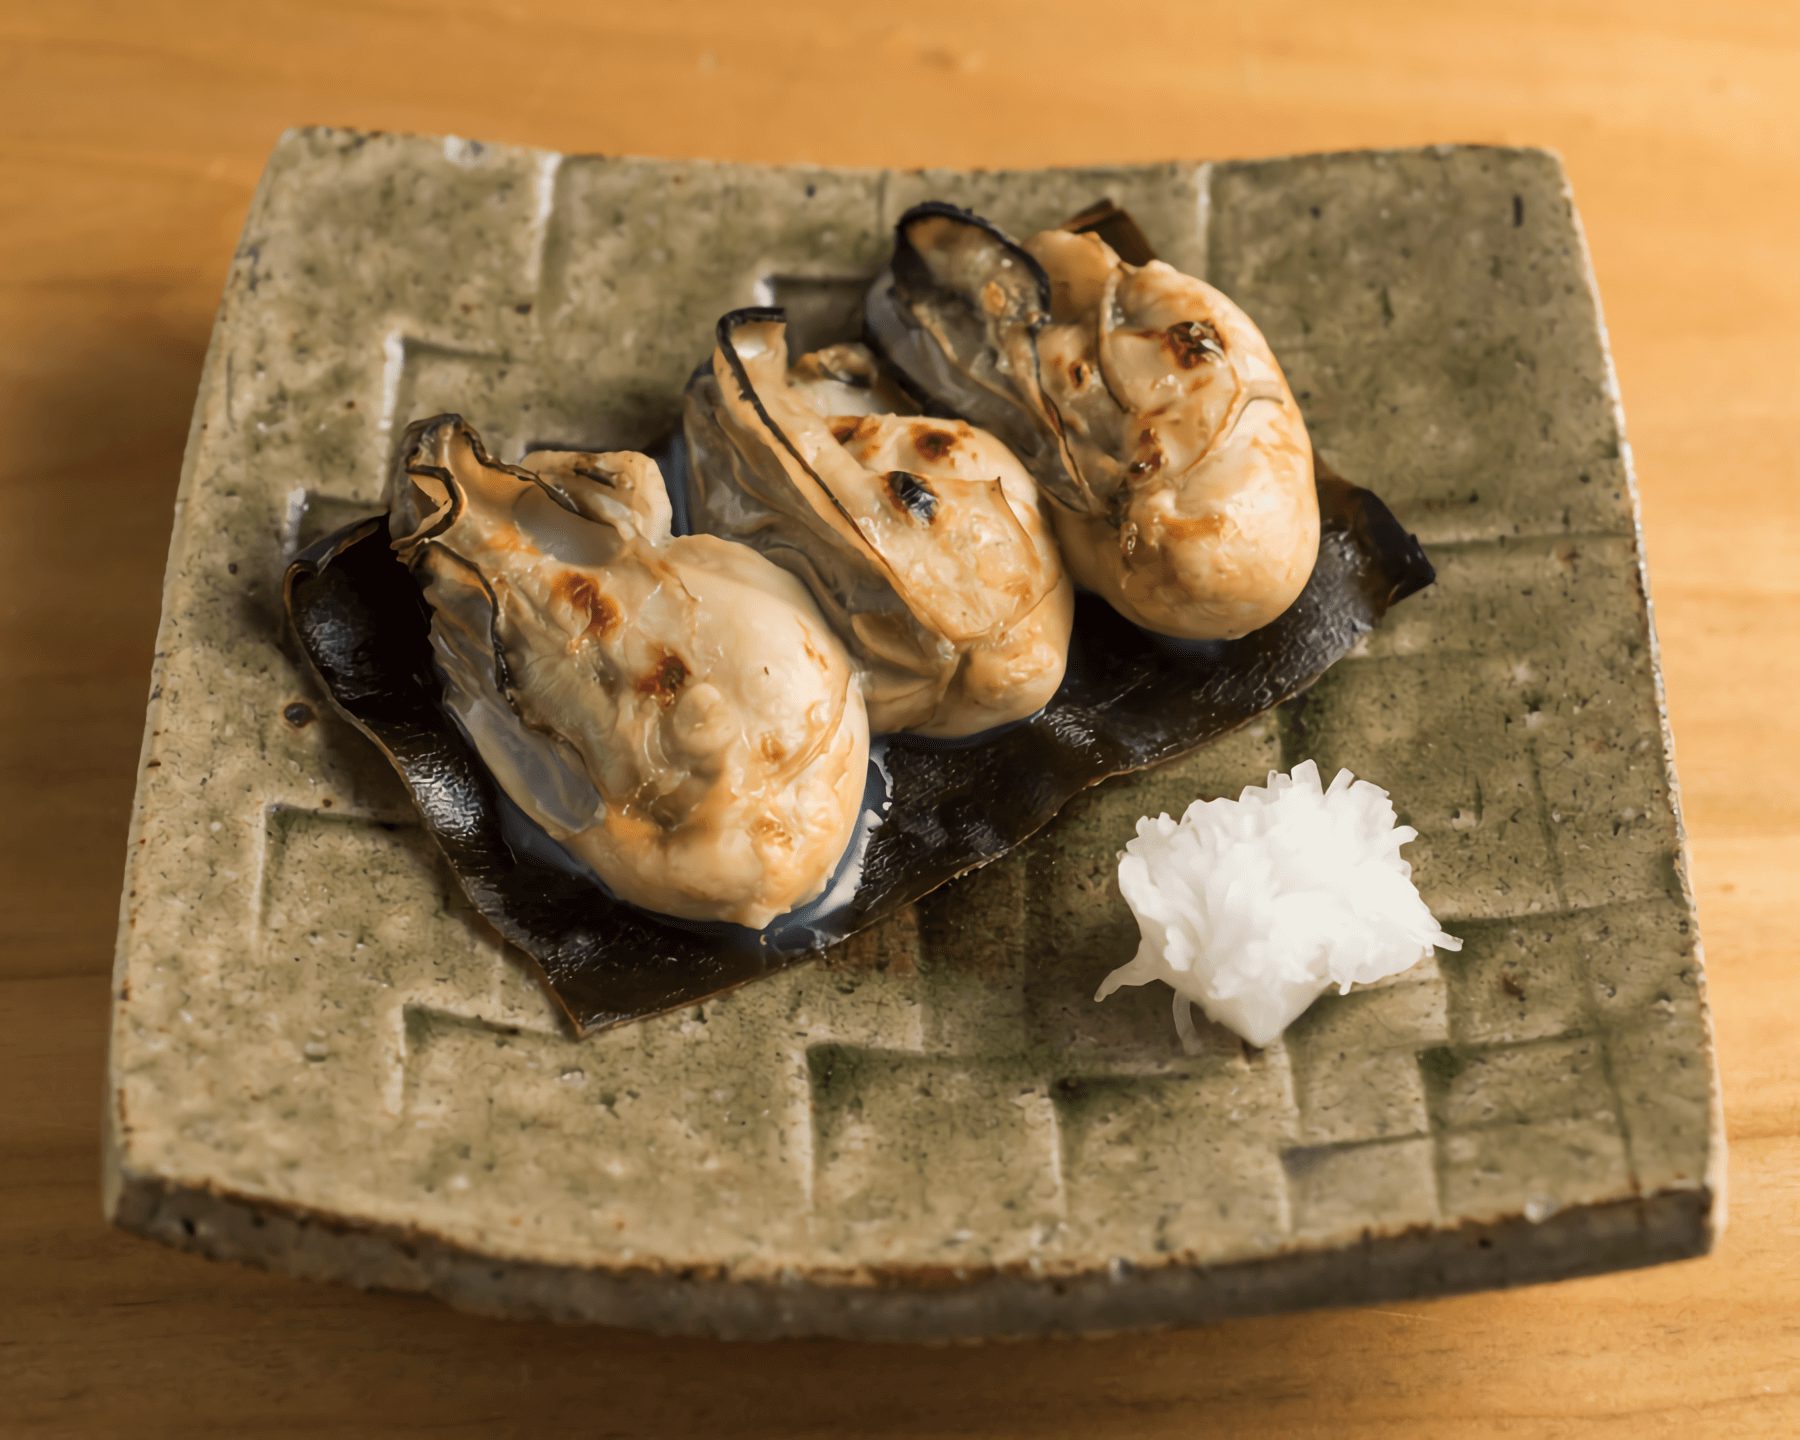 Grilled oyster with kelp